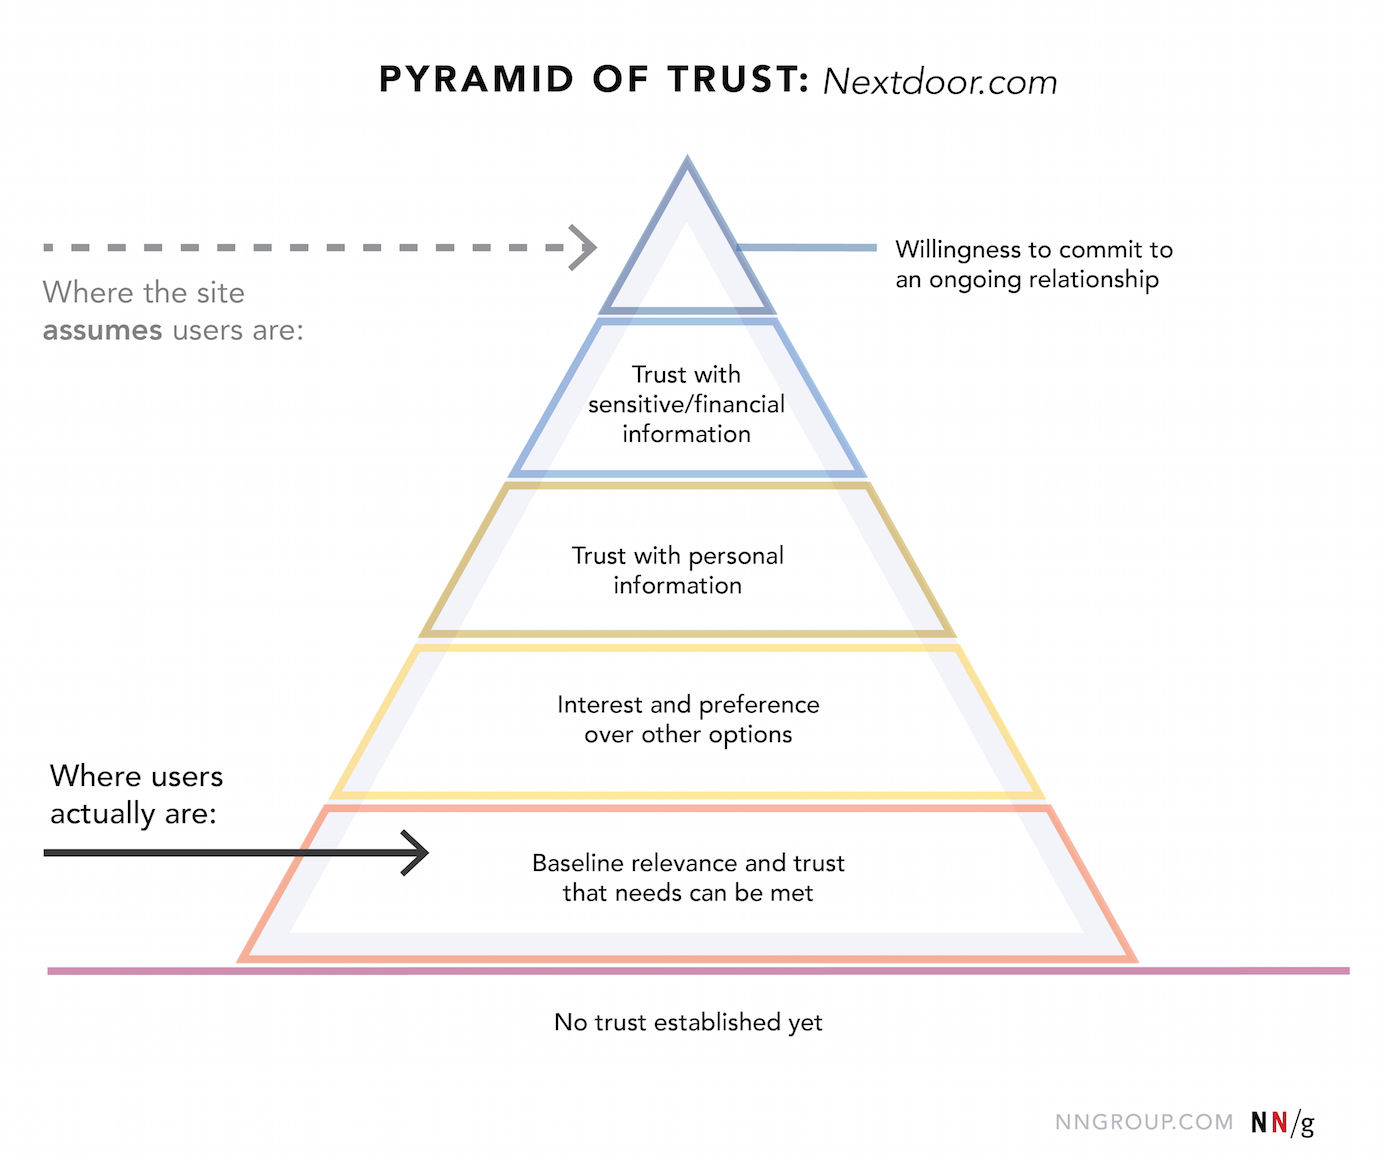 The pyramid of trust for Nextdoor.com shows where the site assumes users are compared to where they actually are.